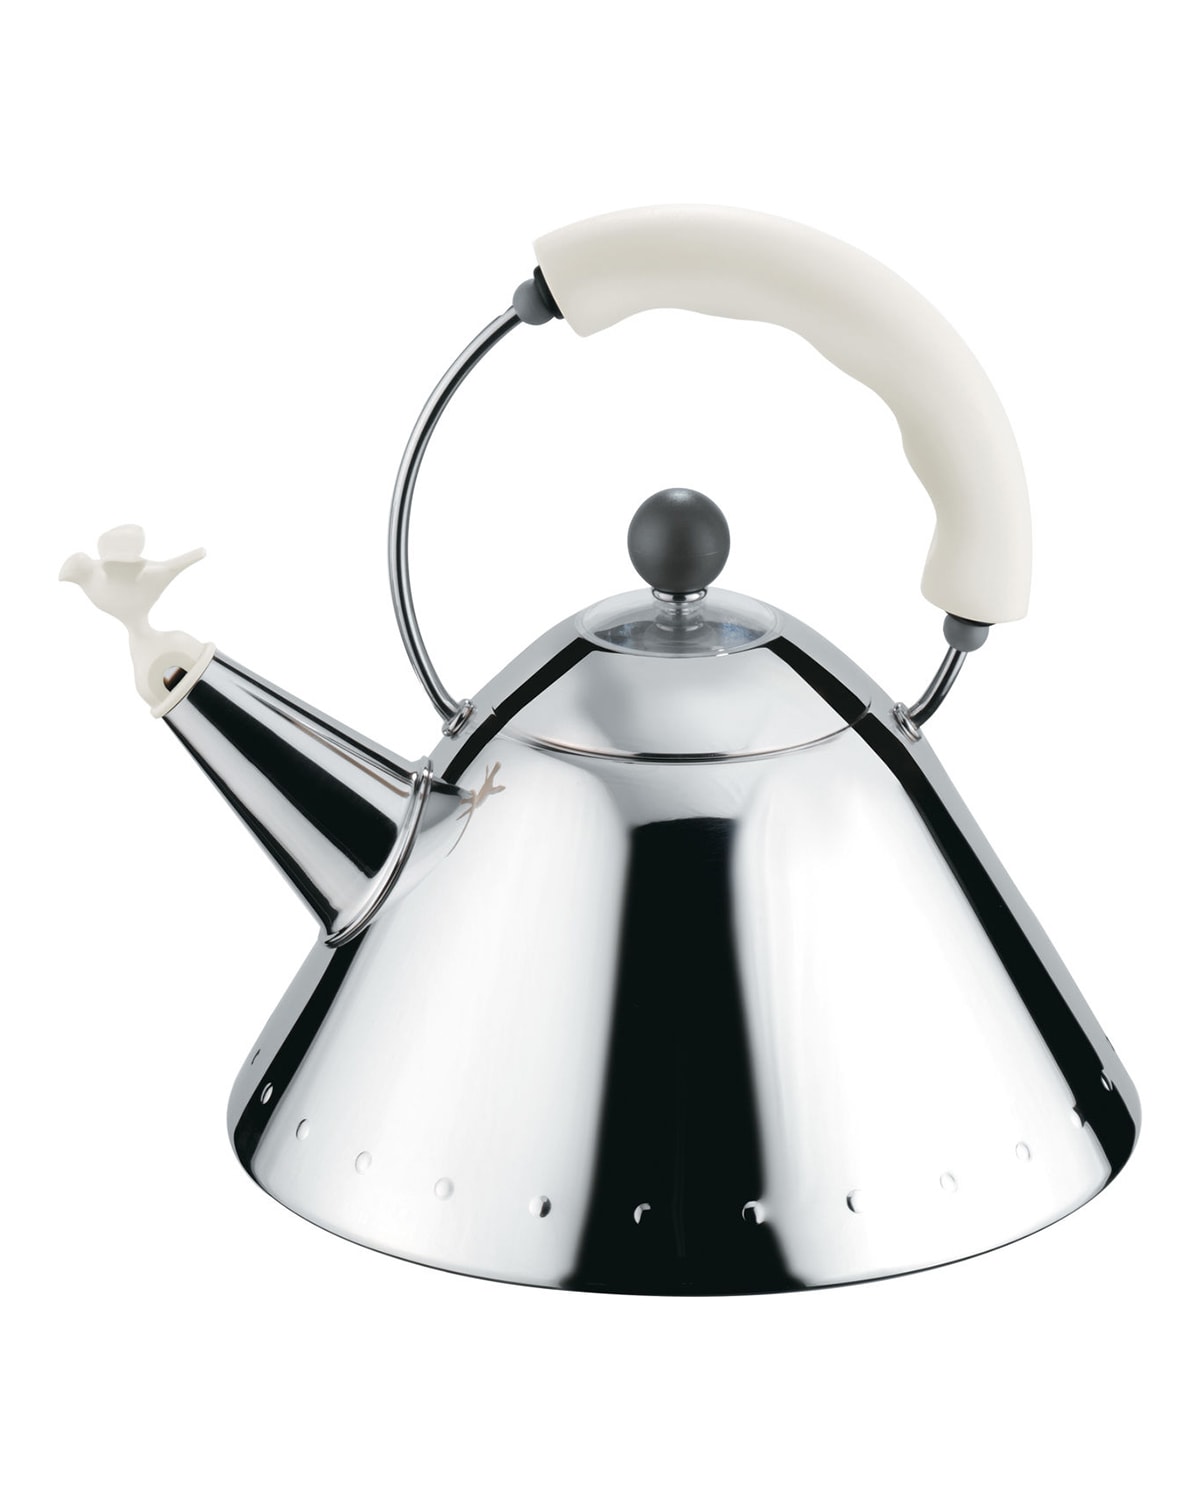 Alessi Michael Graves Stainless Steel Kettle In Gray